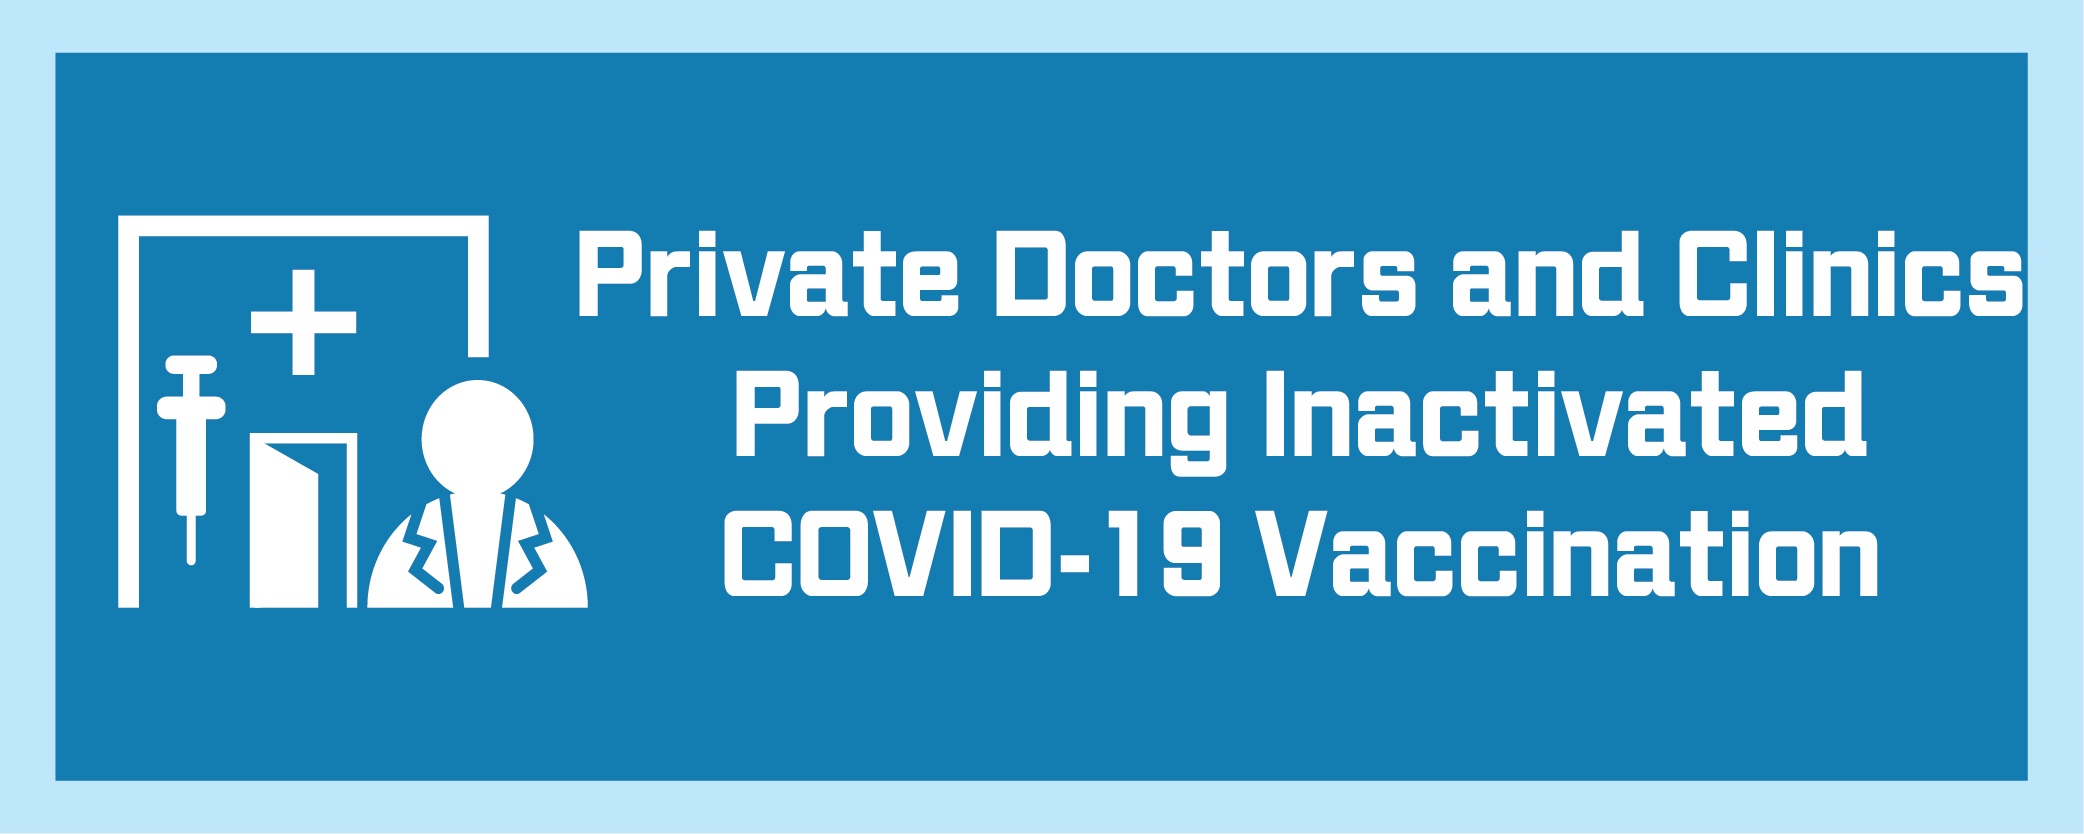 Private Doctors and Clinics Providing Inactivated COVID-19 Vaccination 